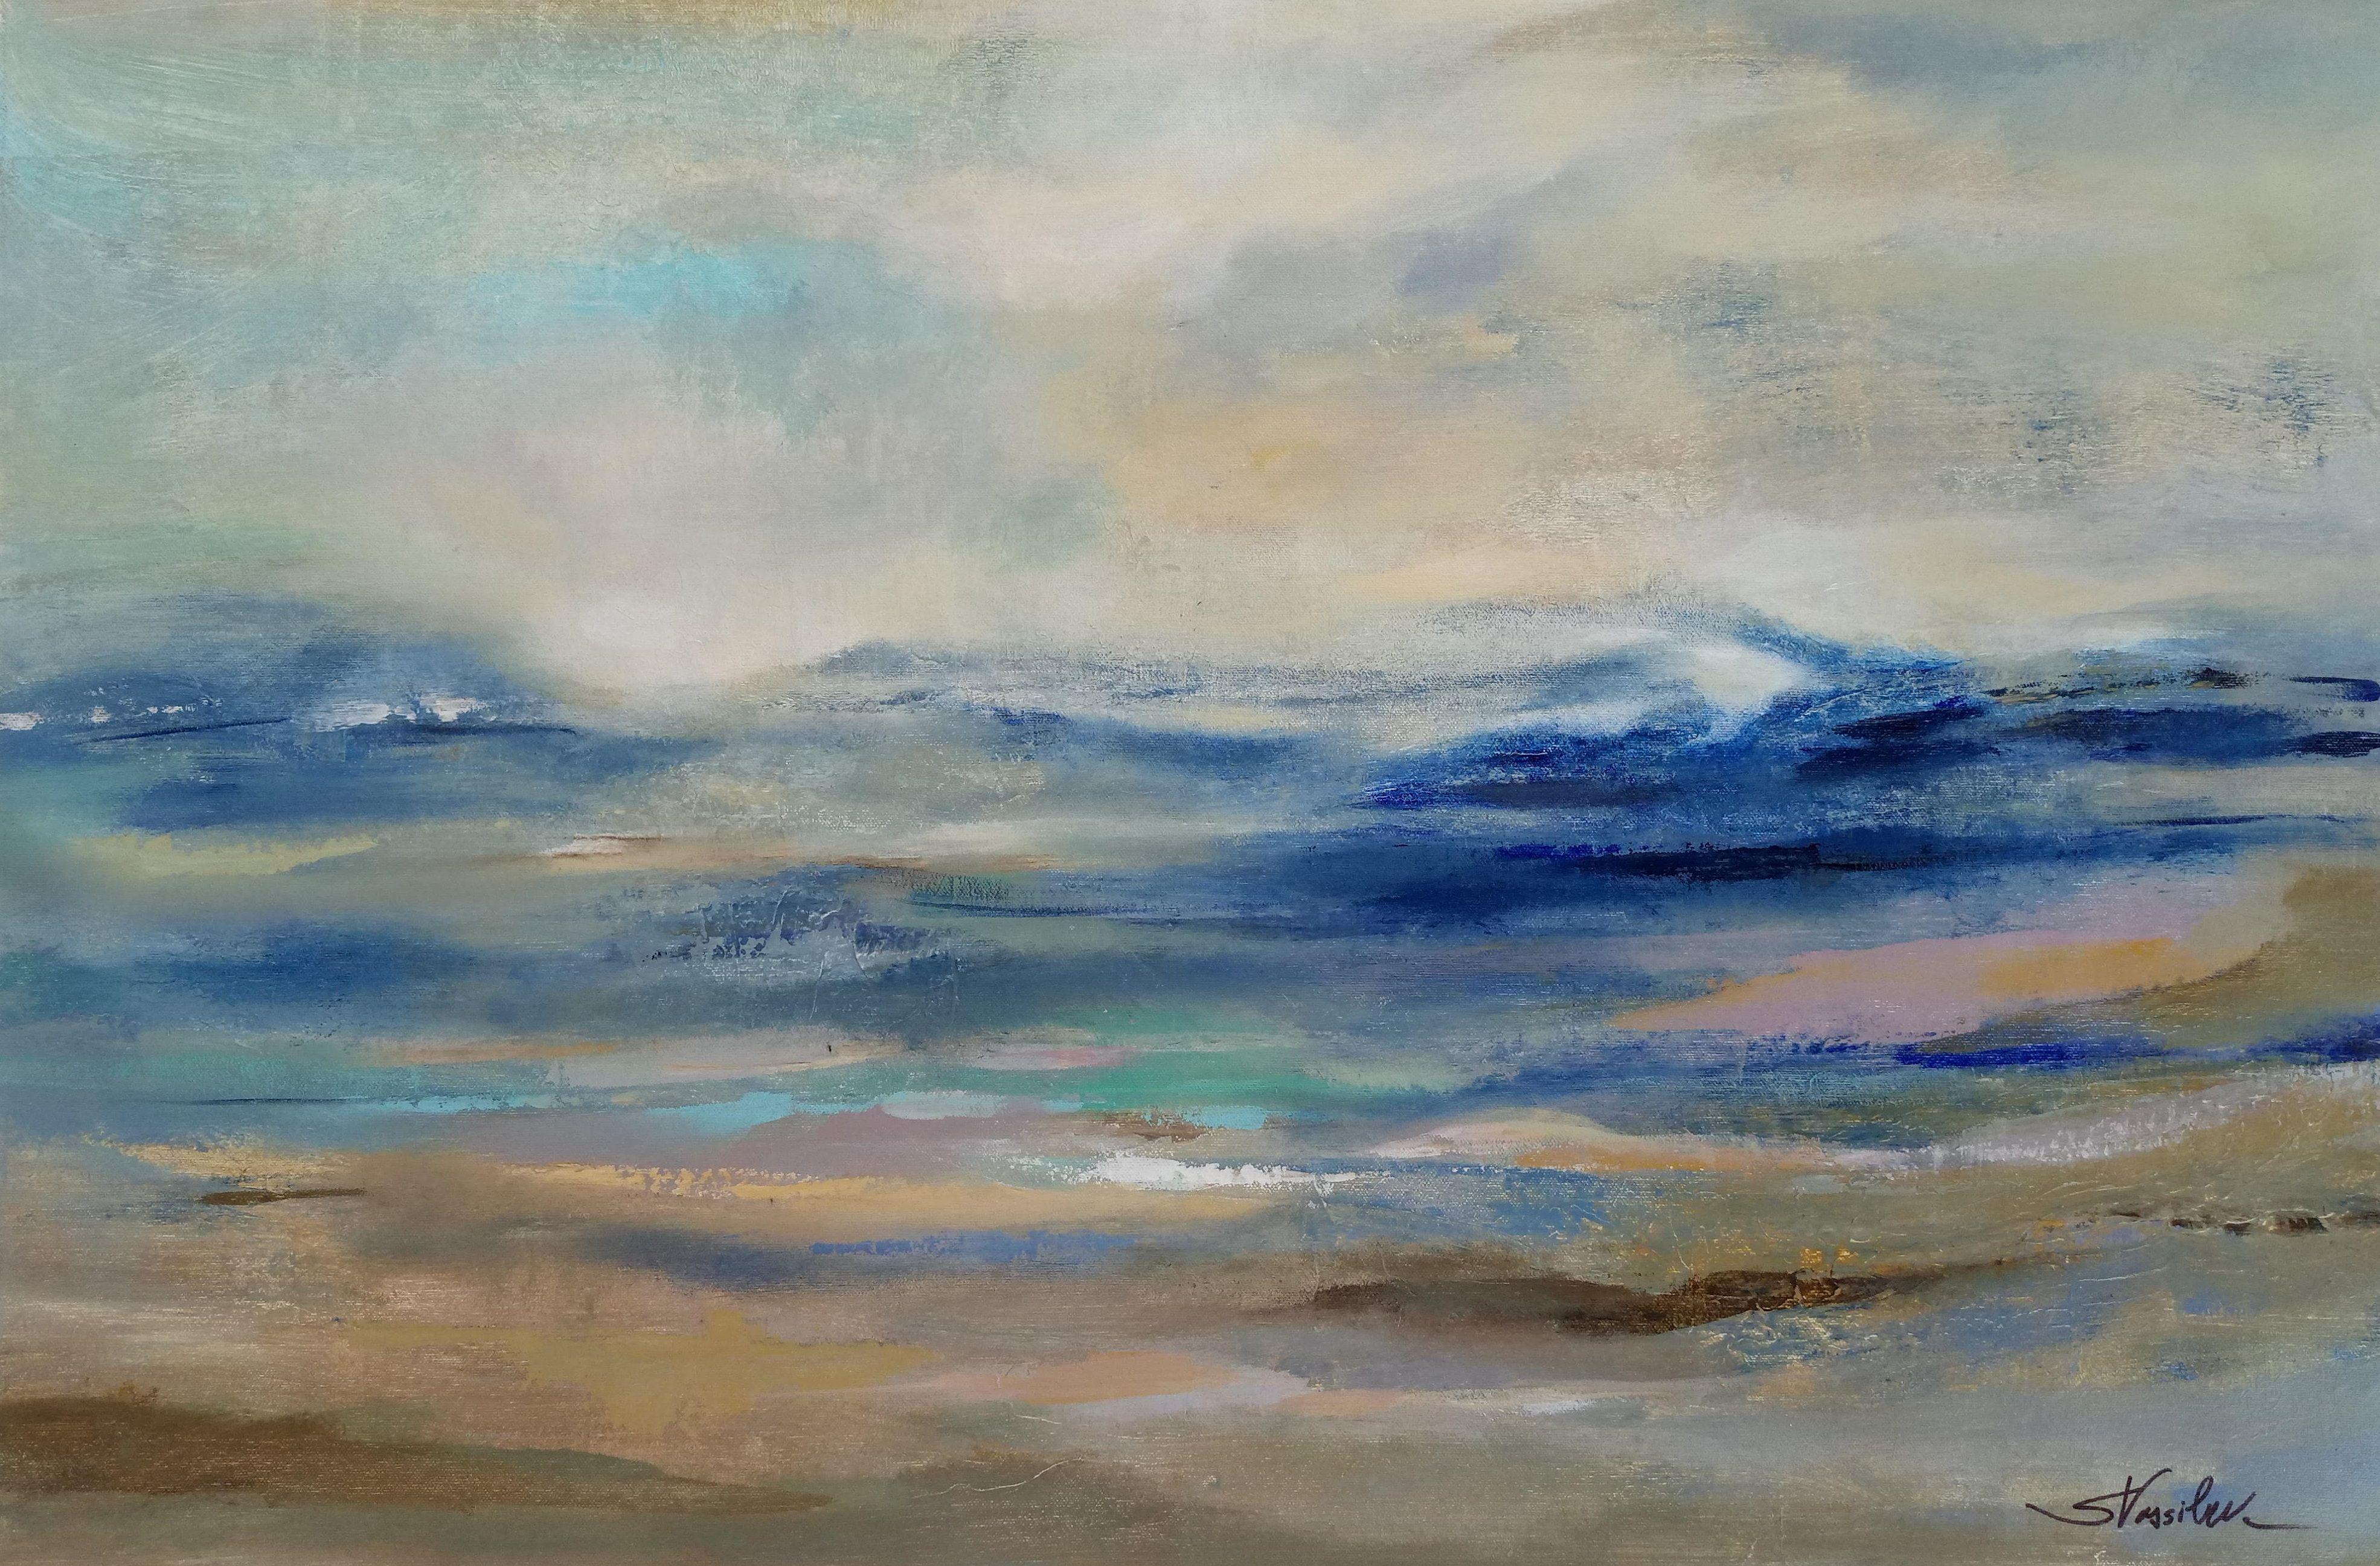 Atmospheric abstracted seascape, expressing the beauty of the sea and sky. Cool, calming color palette of differed shades of blue interacting with white reflections. Inspired by an early morning marine layer. Gallery-wrapped, sides painted in dark